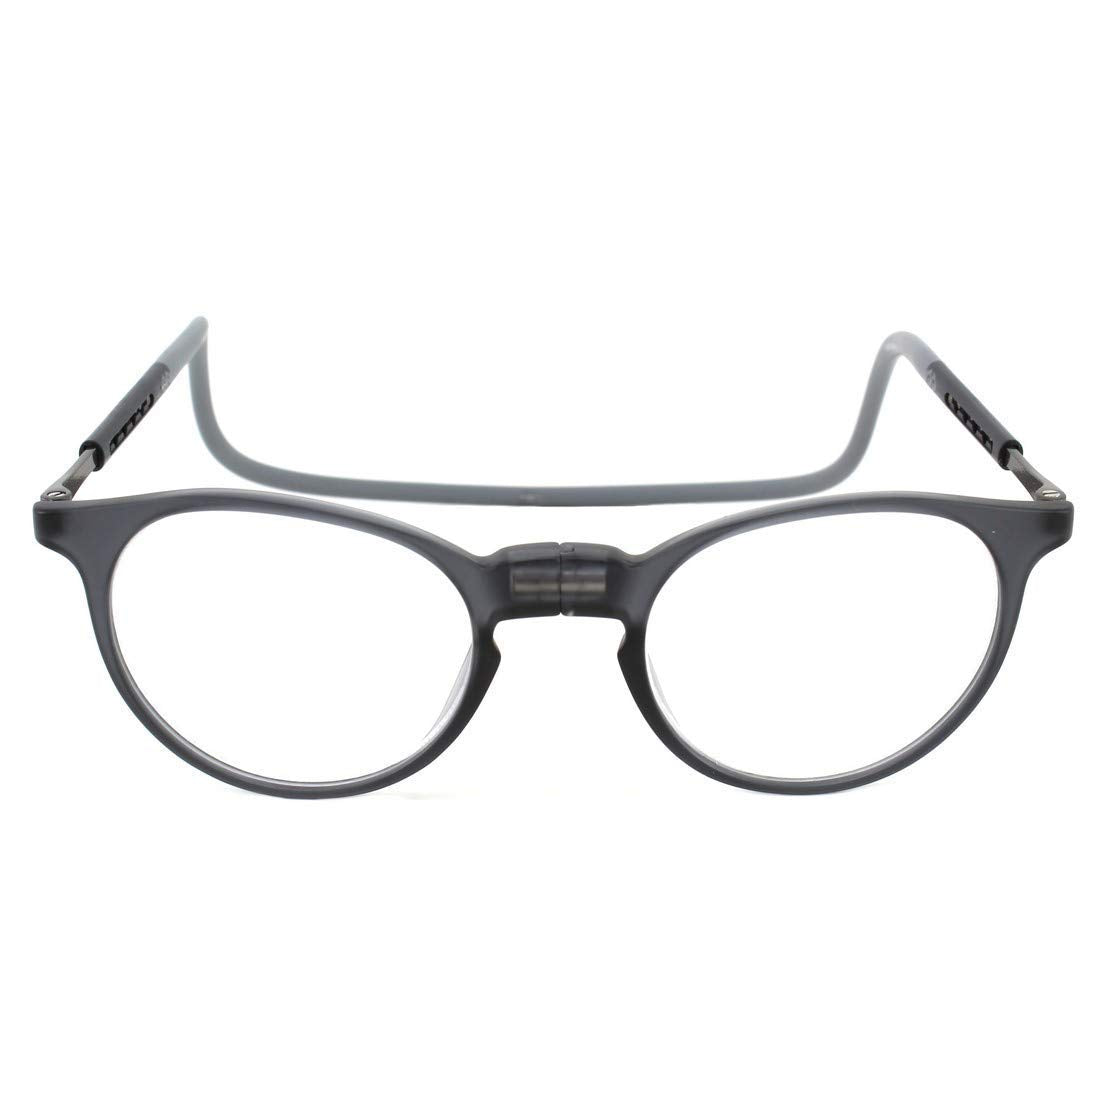 Round Magnetic Easyflex Reading Spectacle Glasses Suitable For Near Vision Color Grey